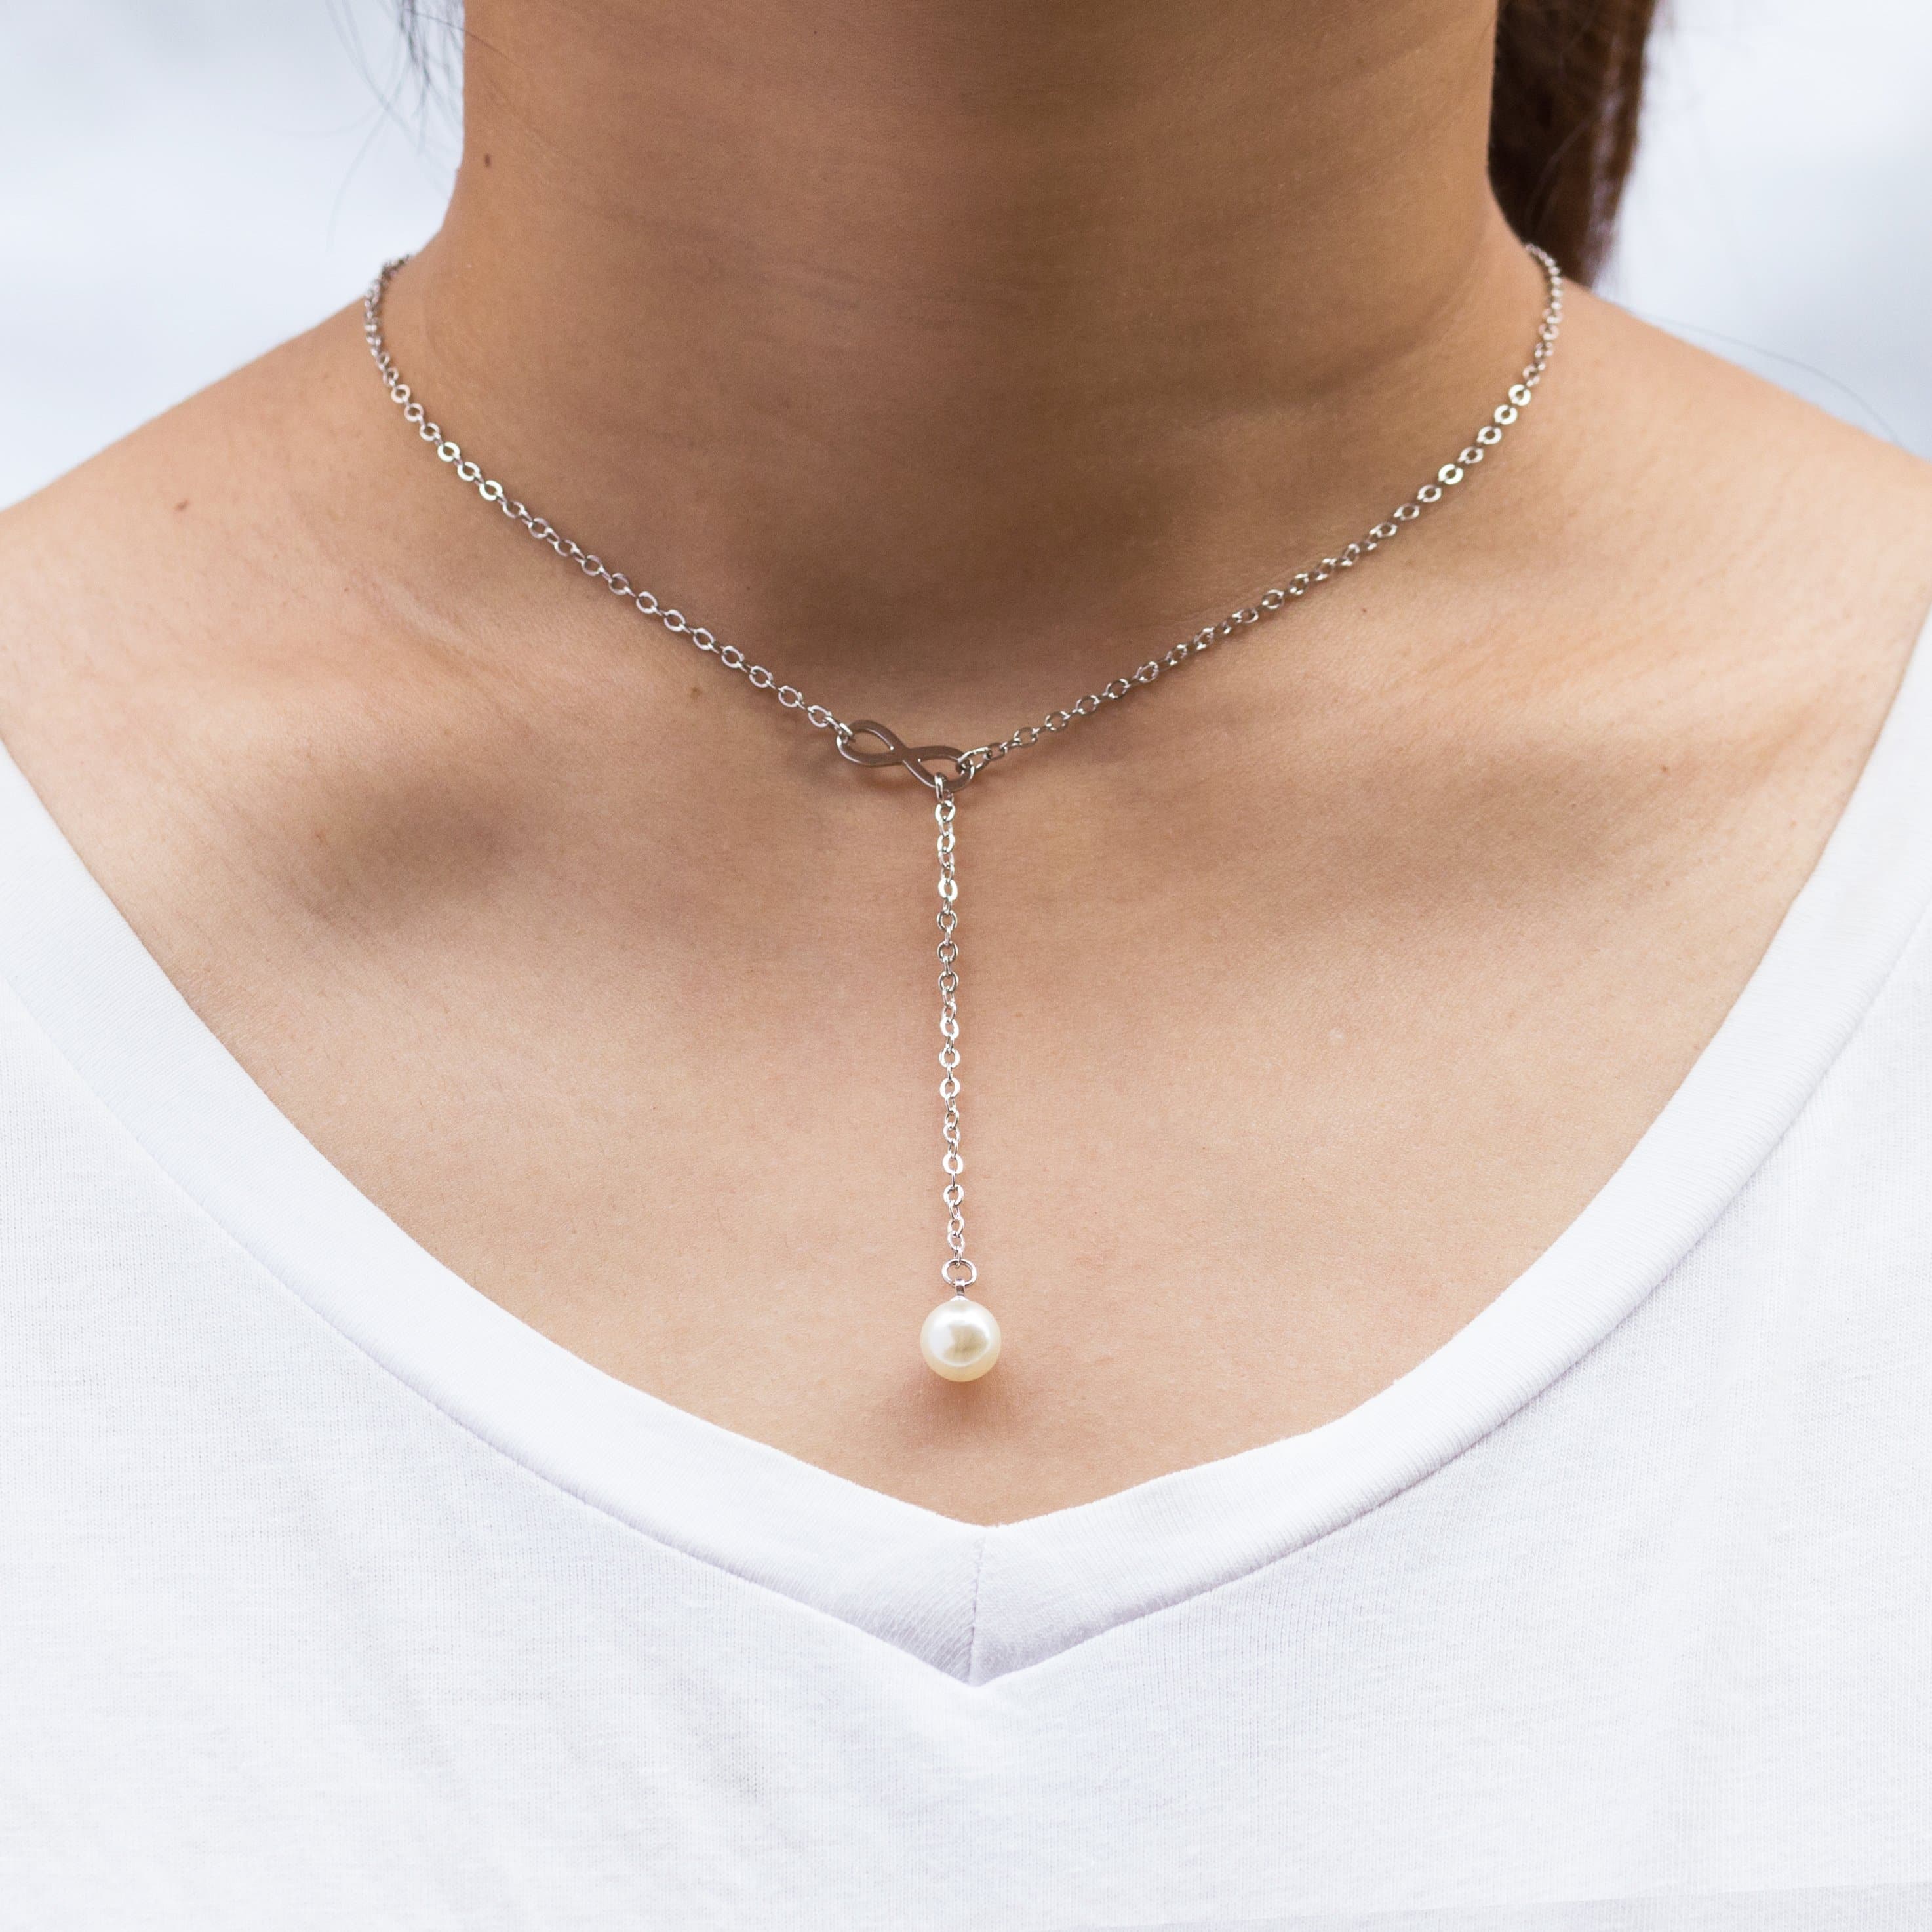 Silver Plated Infinity Pearl Necklace